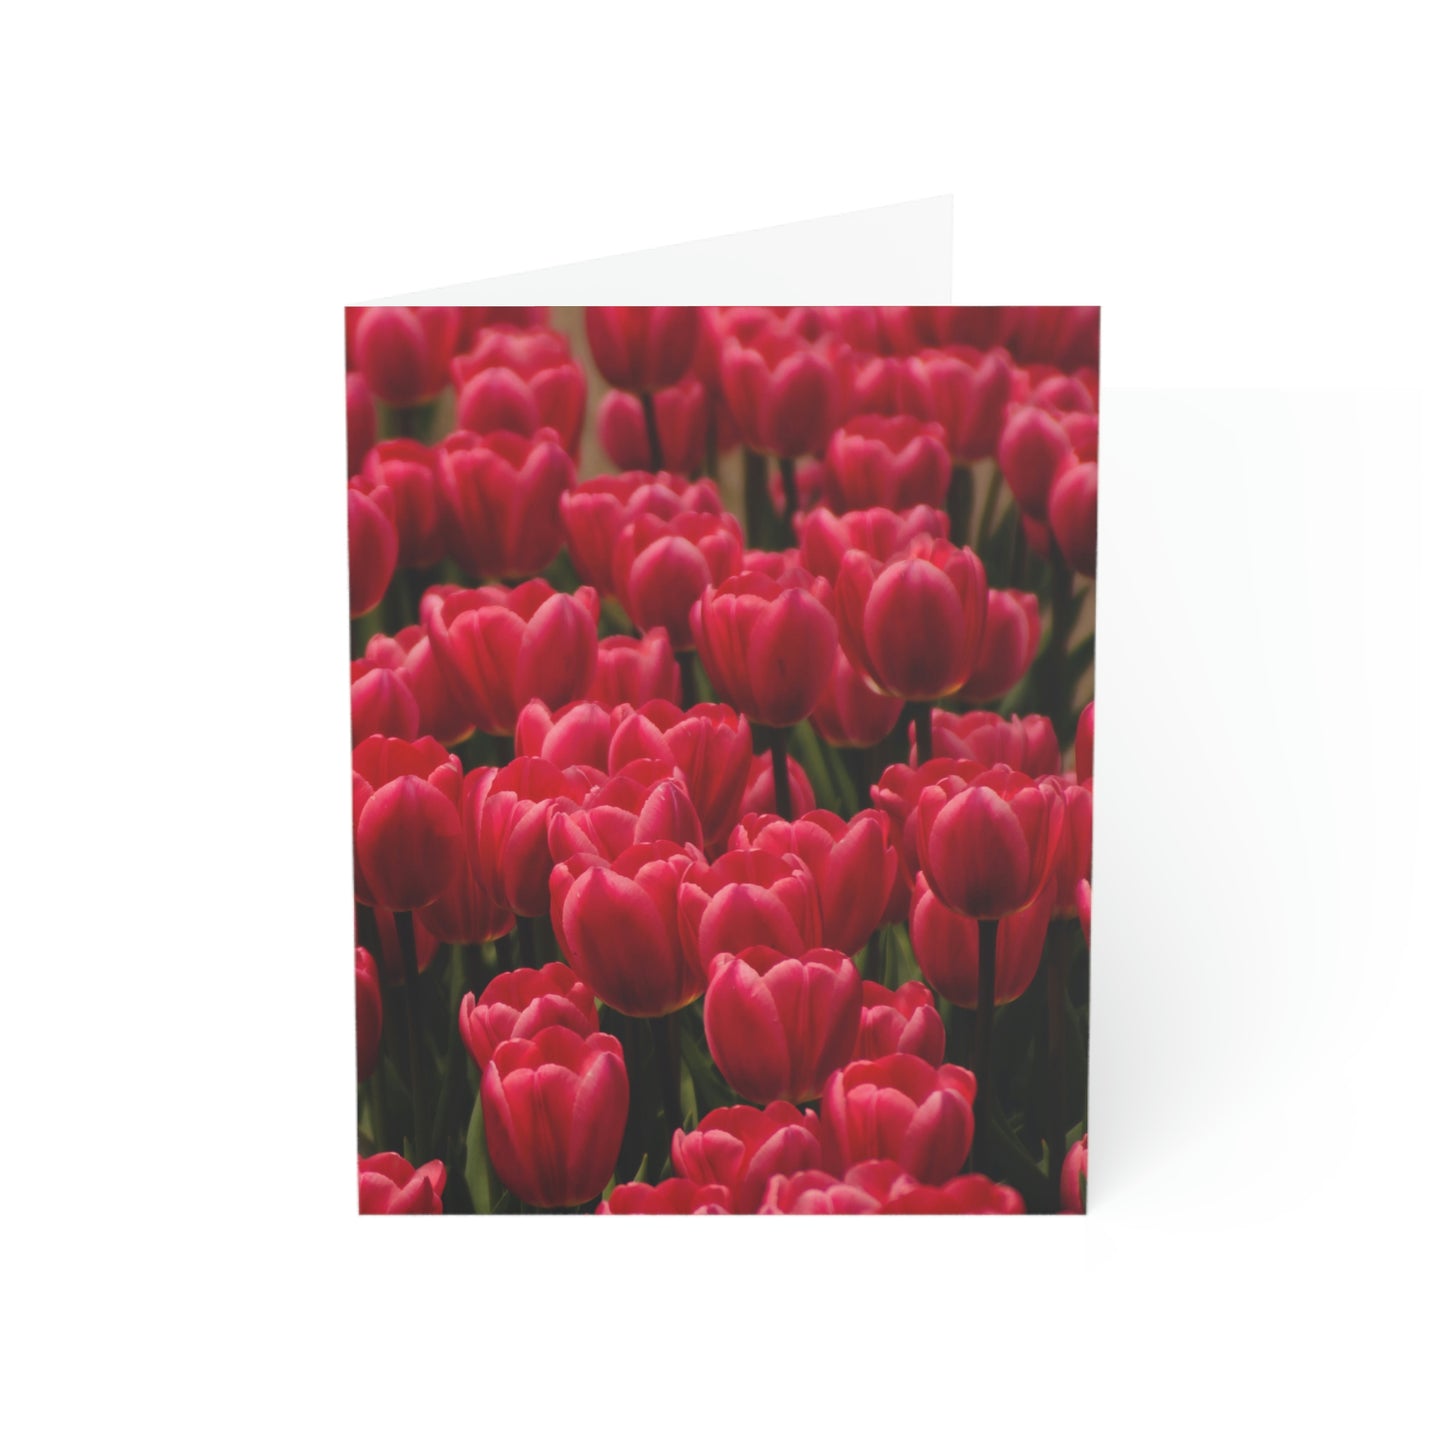 Flowers 16 Greeting Cards (1, 10, 30, and 50pcs)